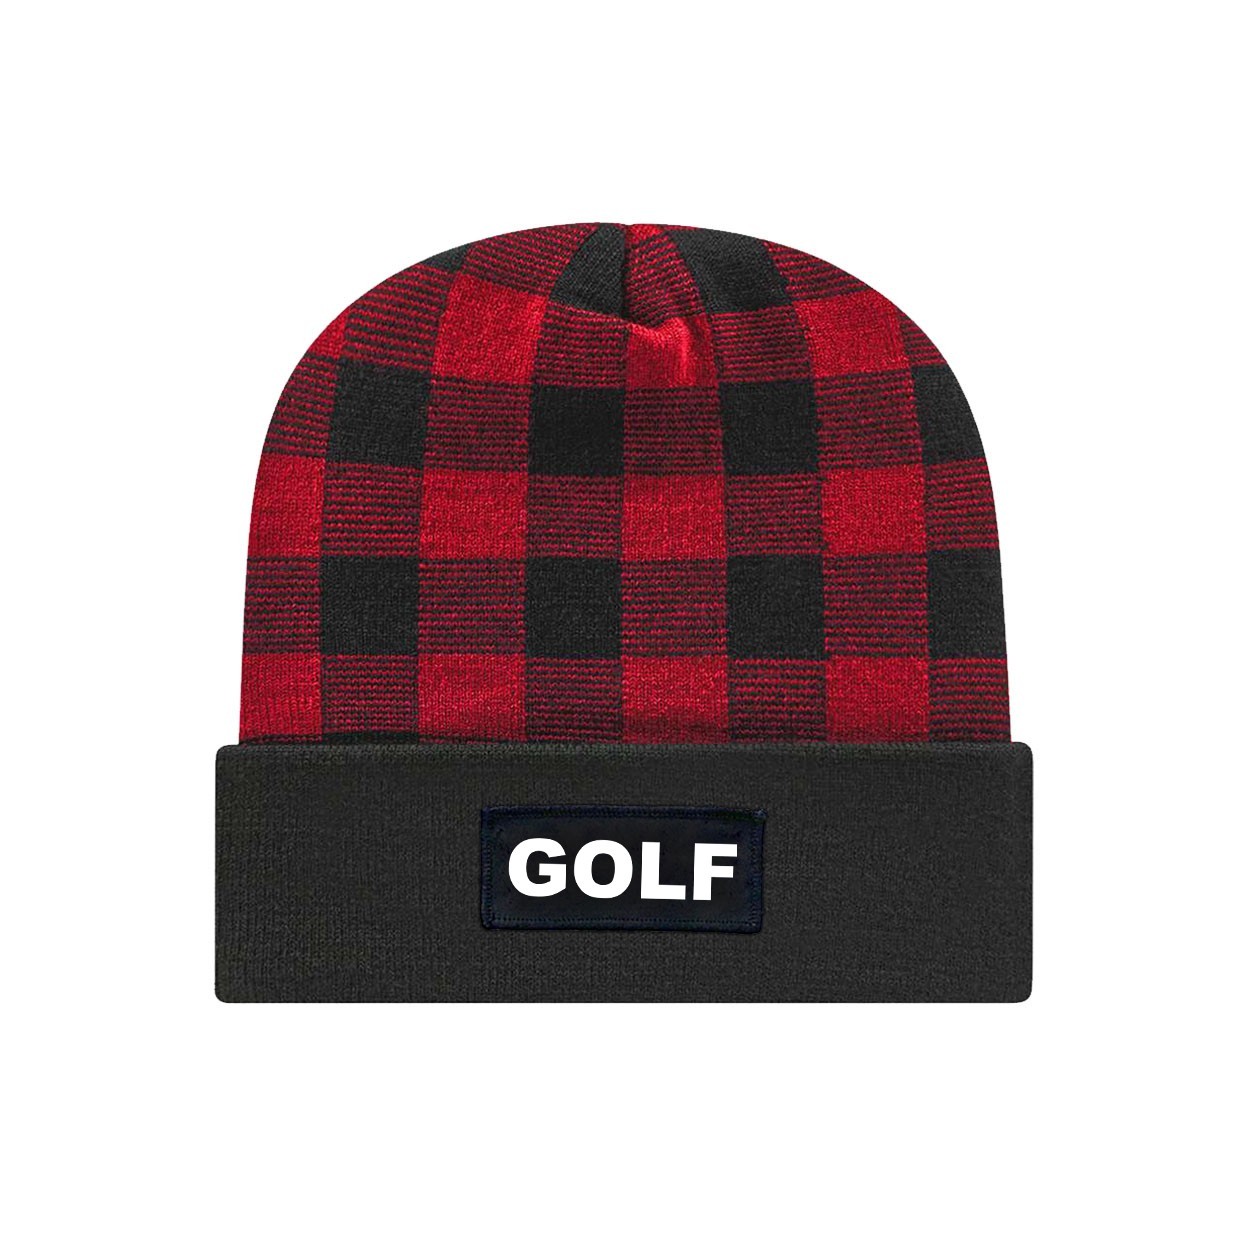 Golf Brand Logo Night Out Woven Patch Roll Up Plaid Beanie Black/True Red